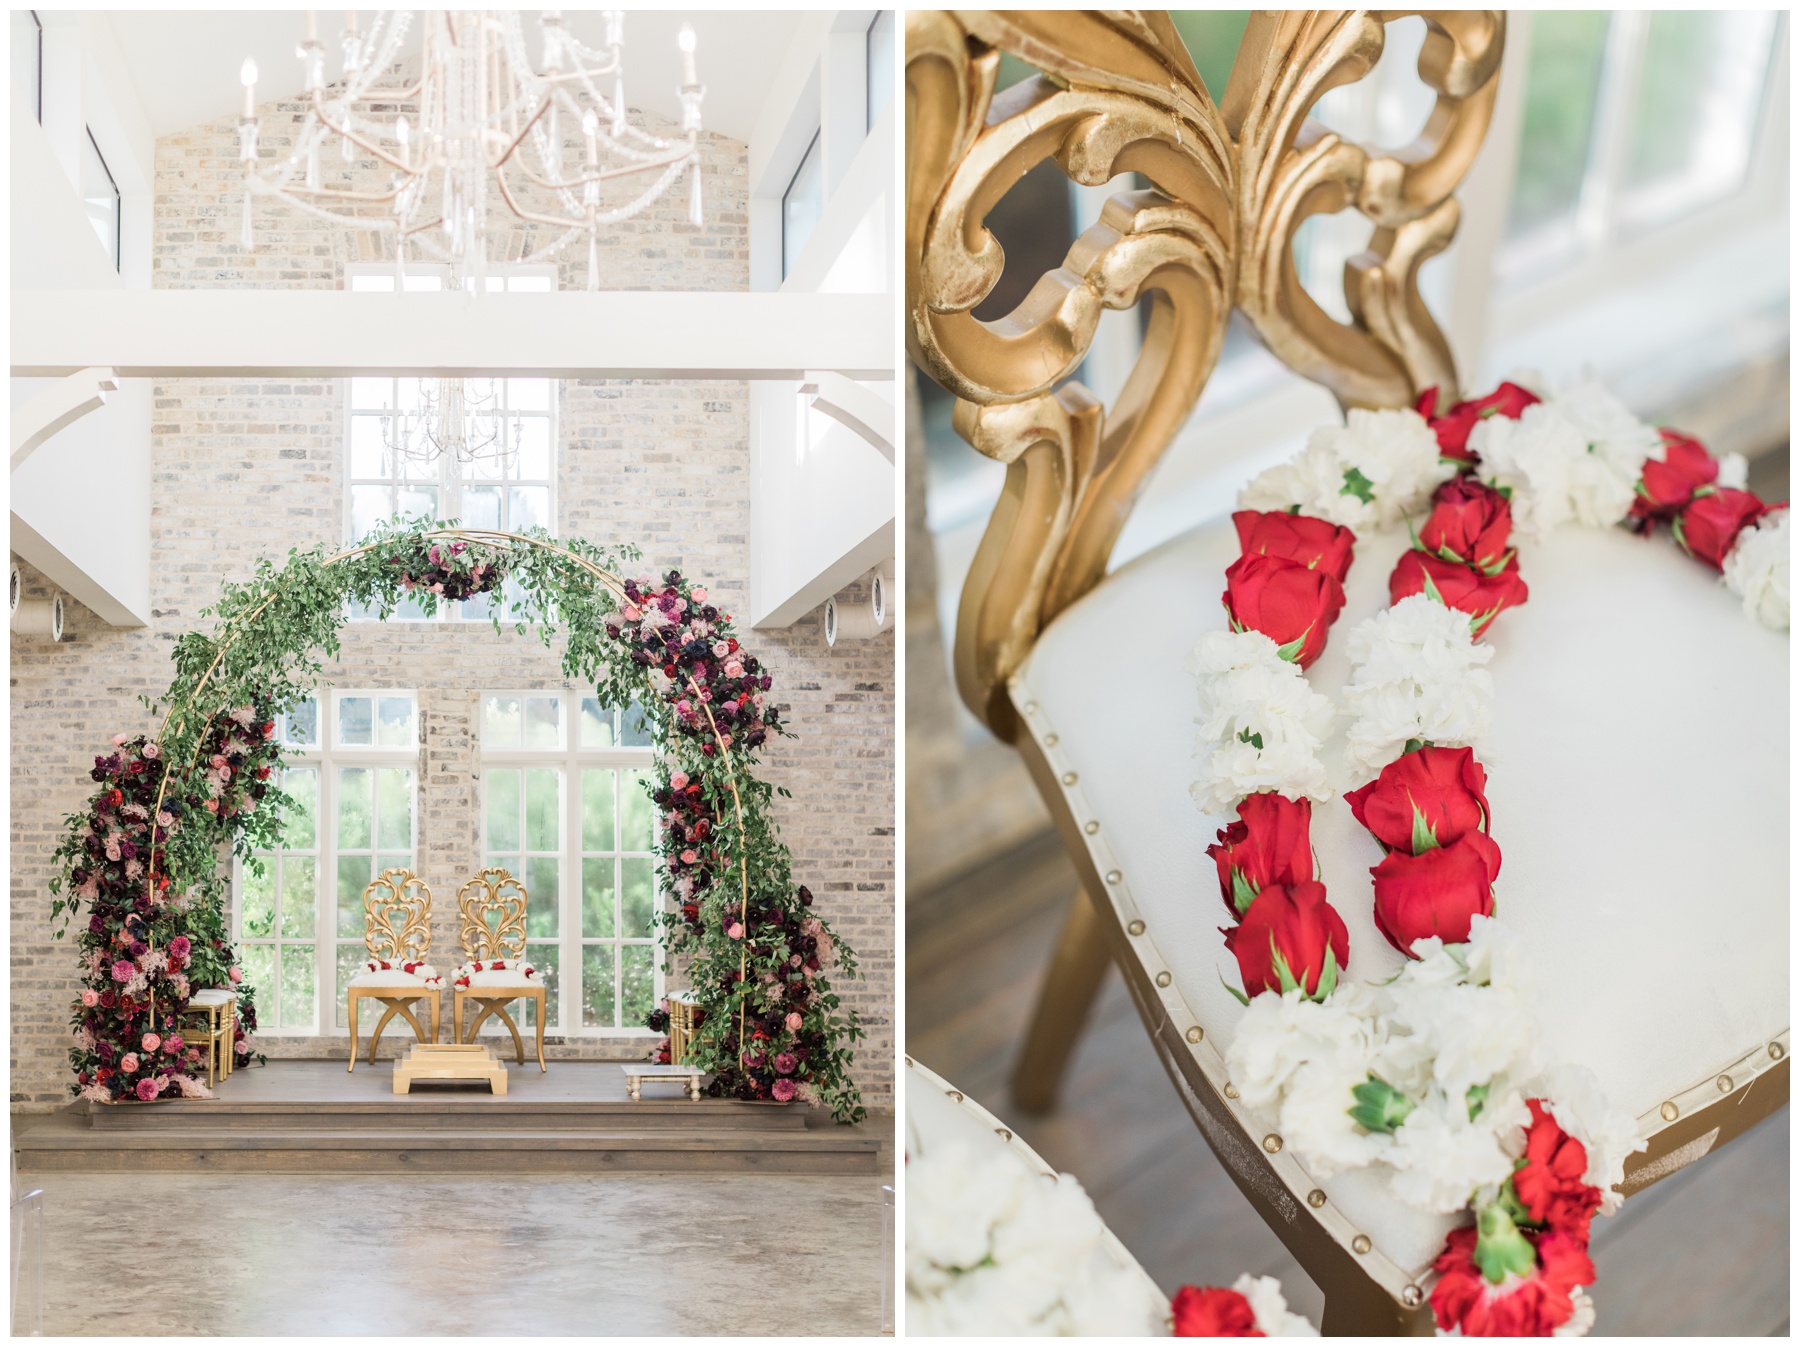 The Peach Orchard - The Woodlands, TX Wedding Venue